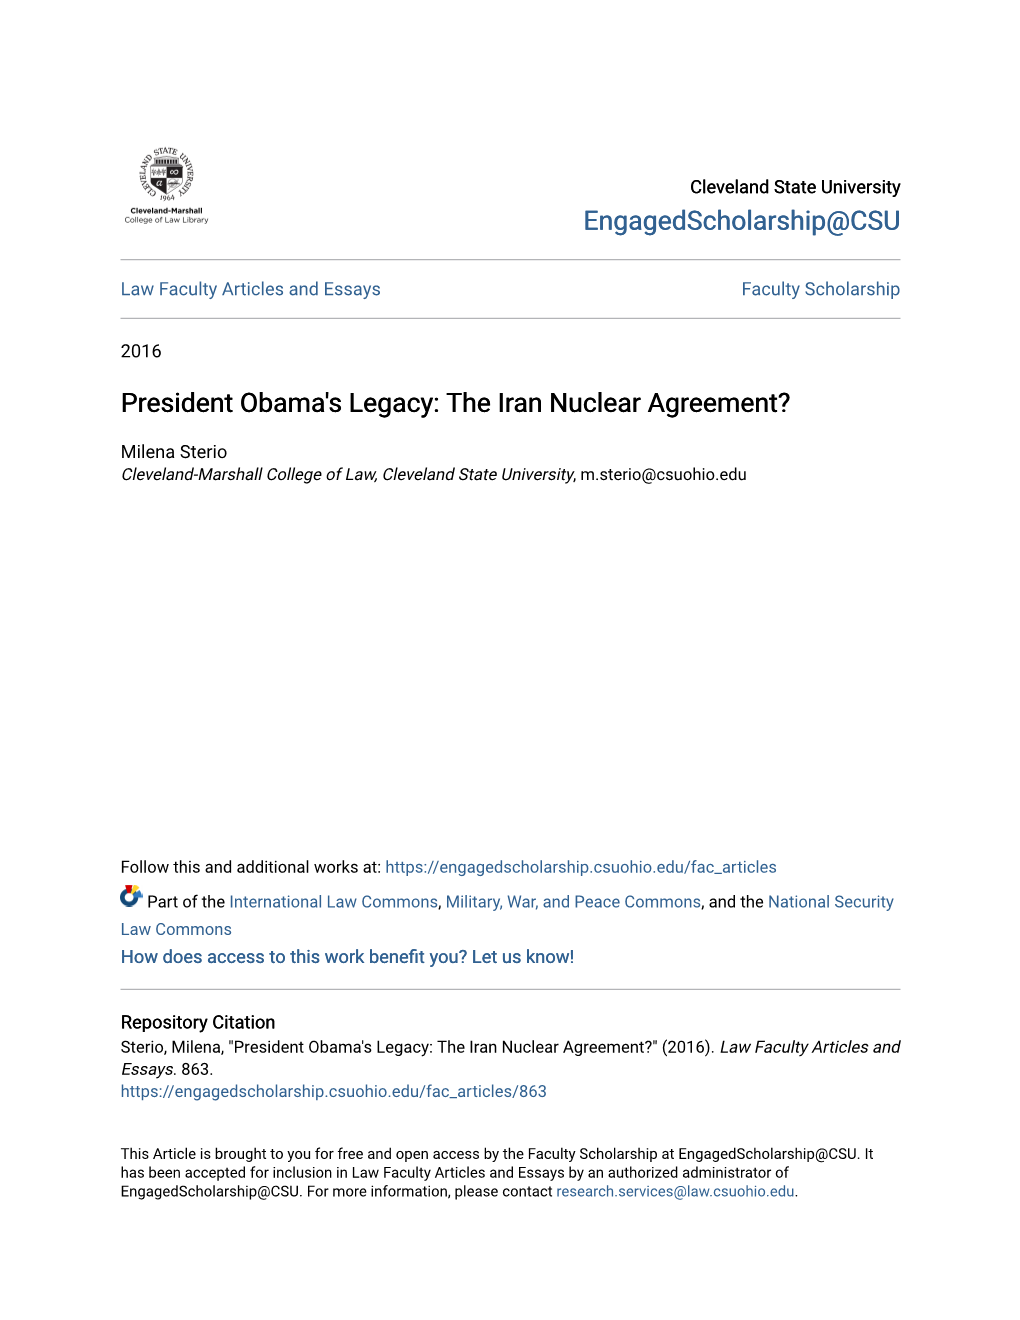 The Iran Nuclear Agreement?